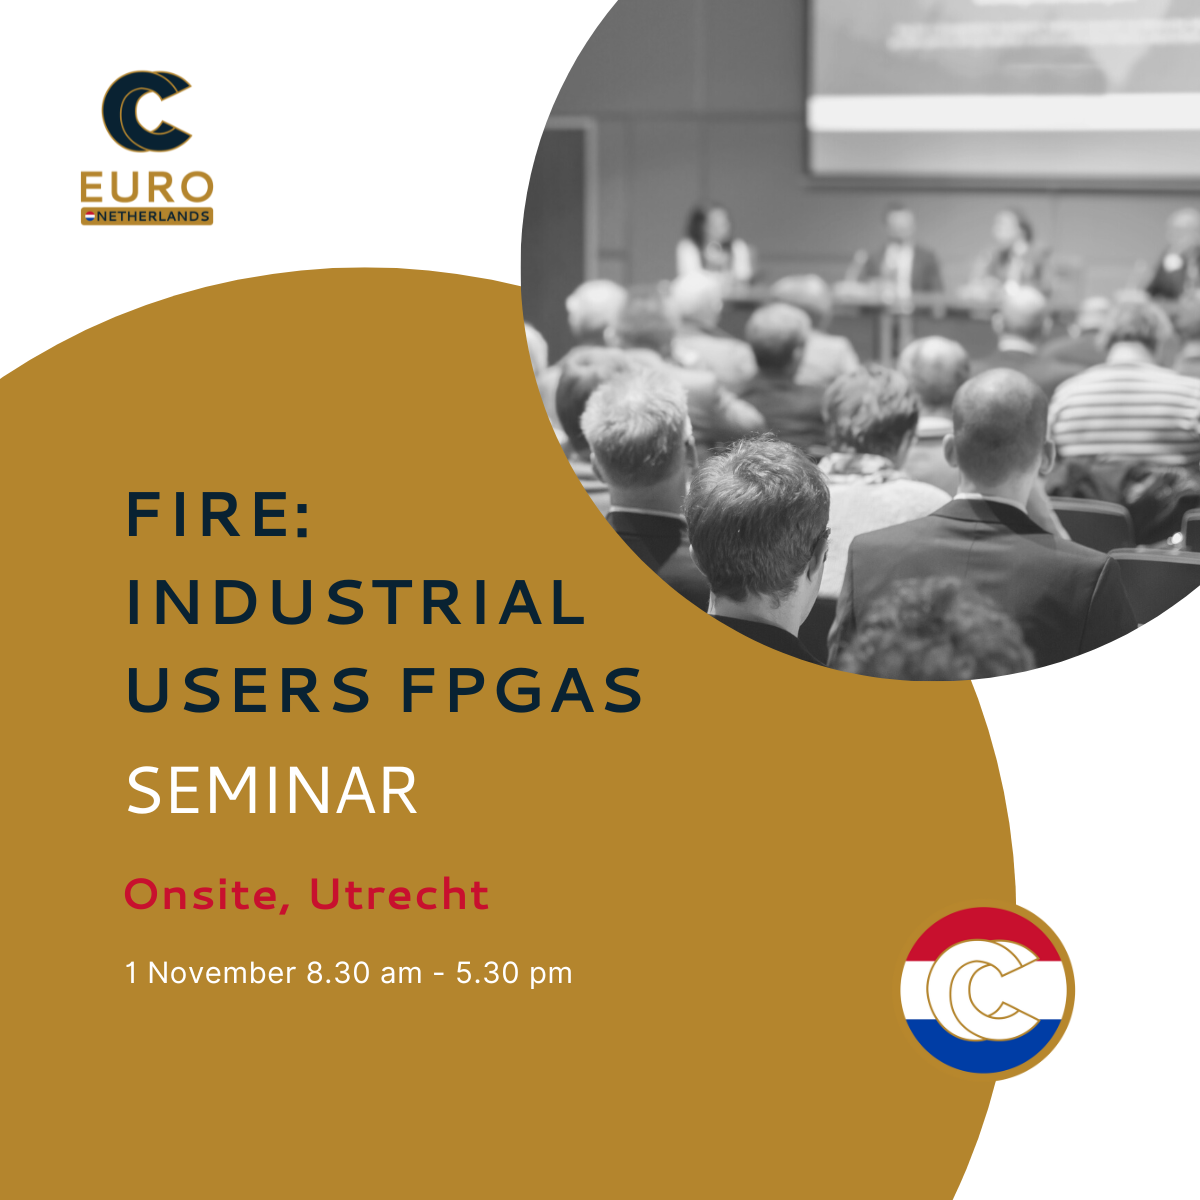 FIRE: Industrial Users FPGAs seminar  (NCC Netherlands